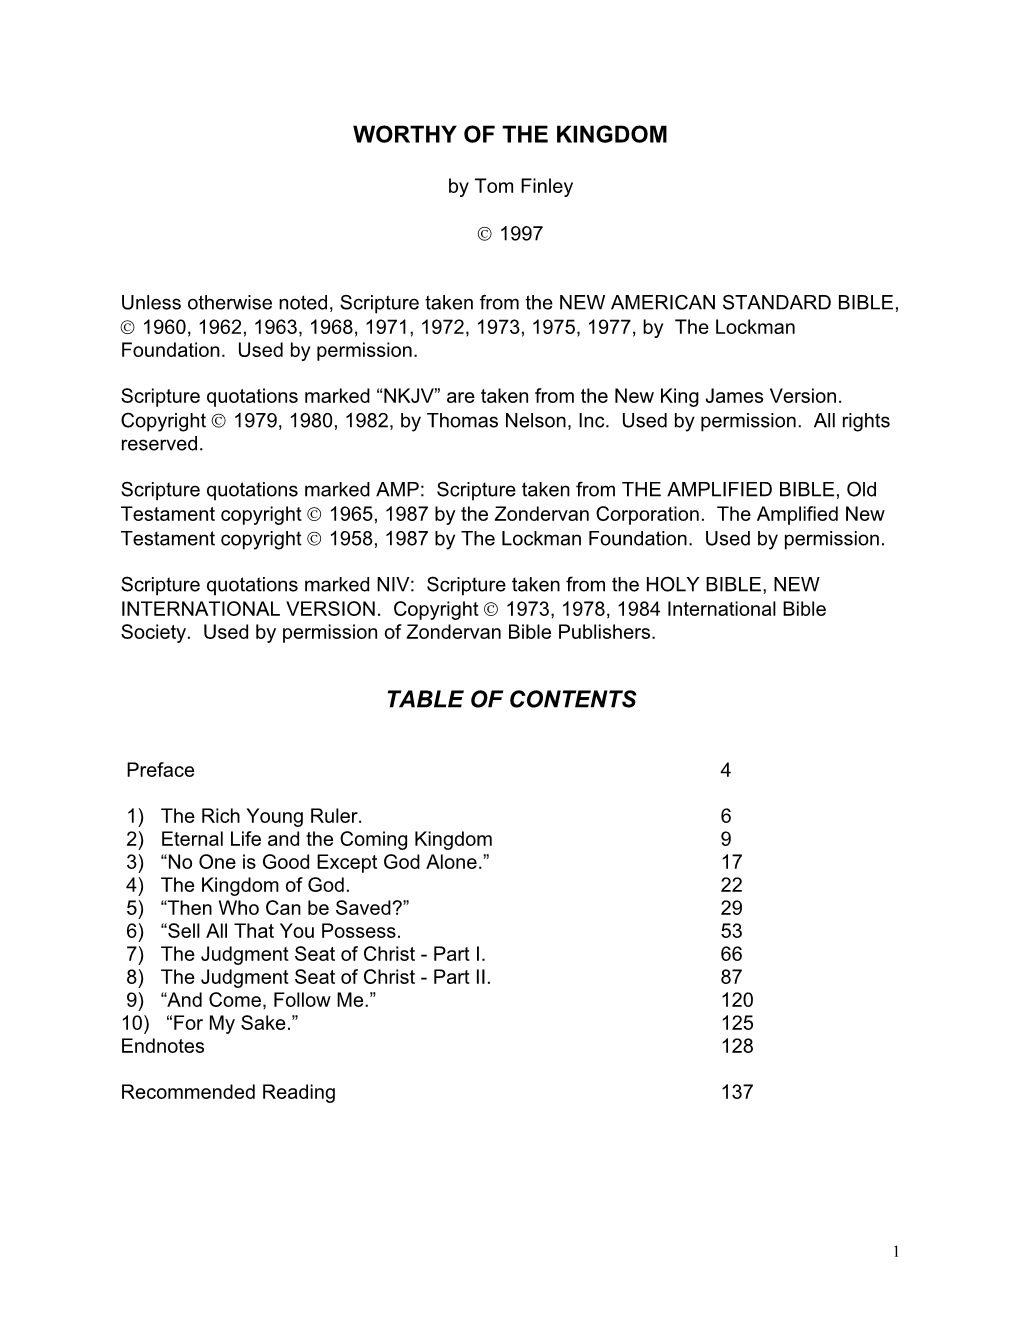 Worthy of the Kingdom Table of Contents